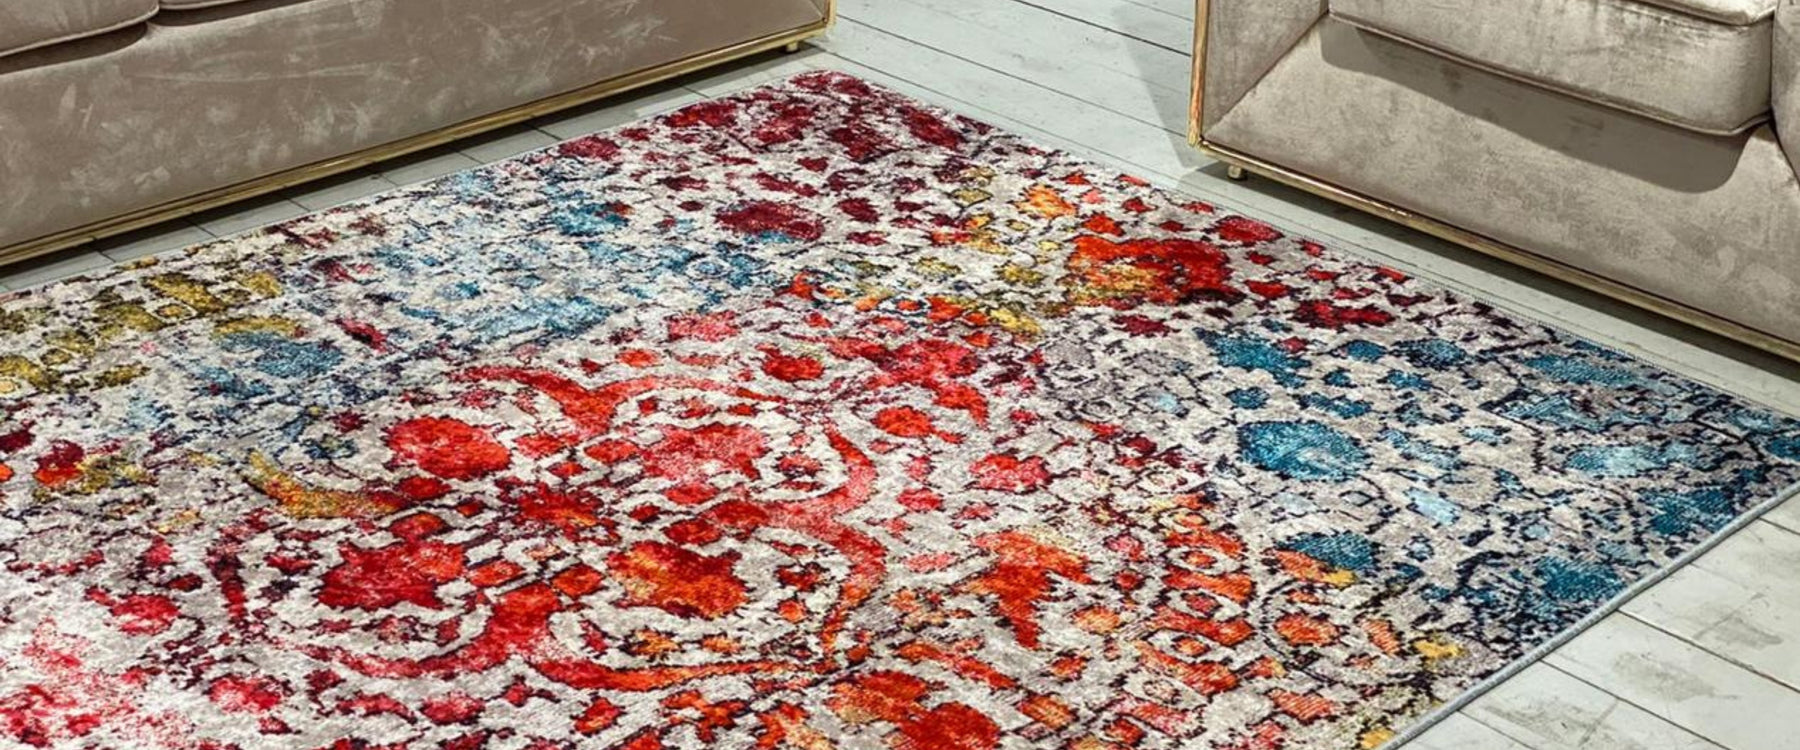 2021 Rugs Trends